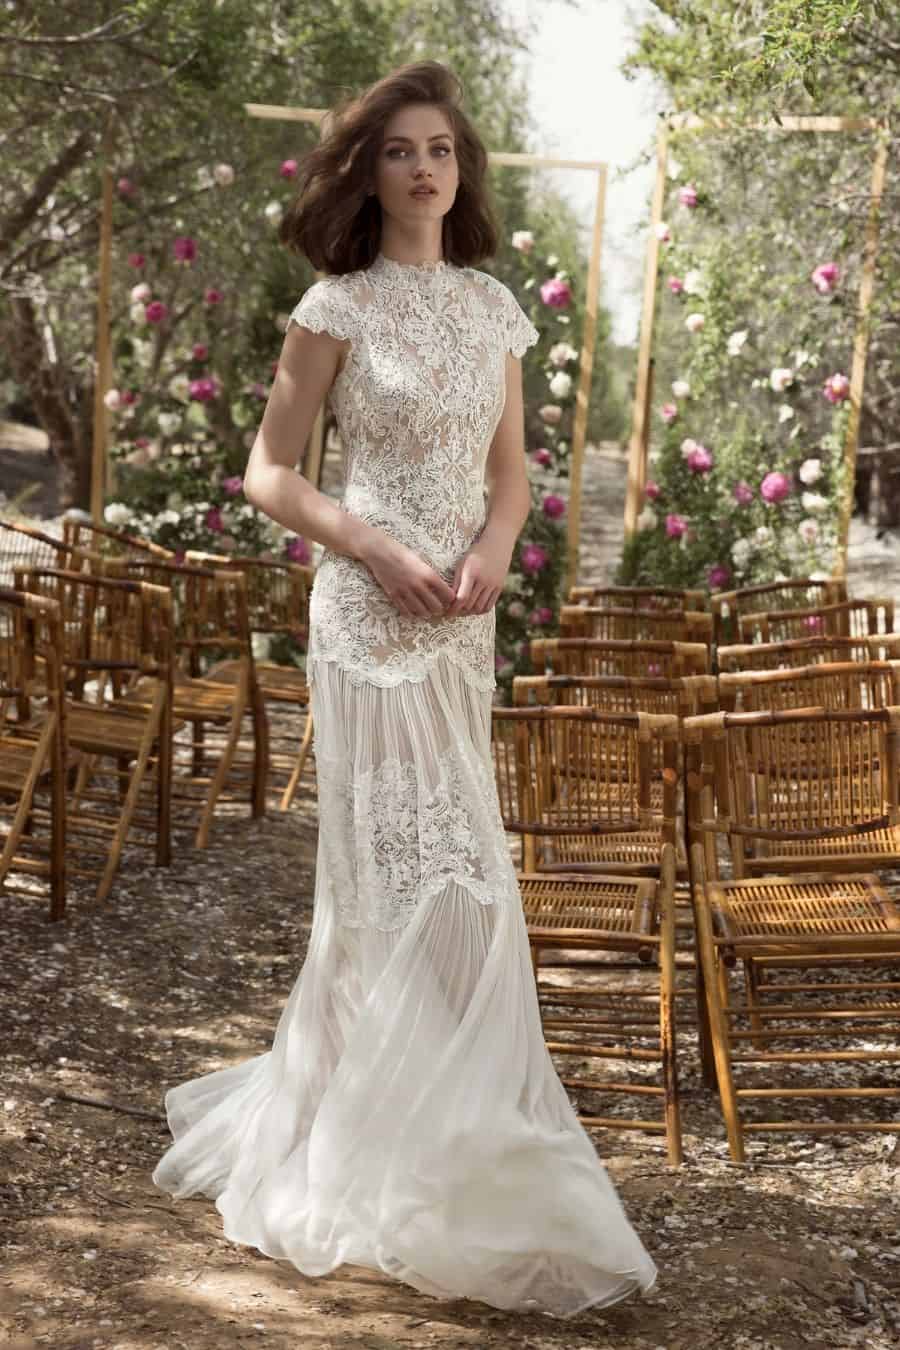 Bride walking in outdoor ceremony setting in lace wedding dress 